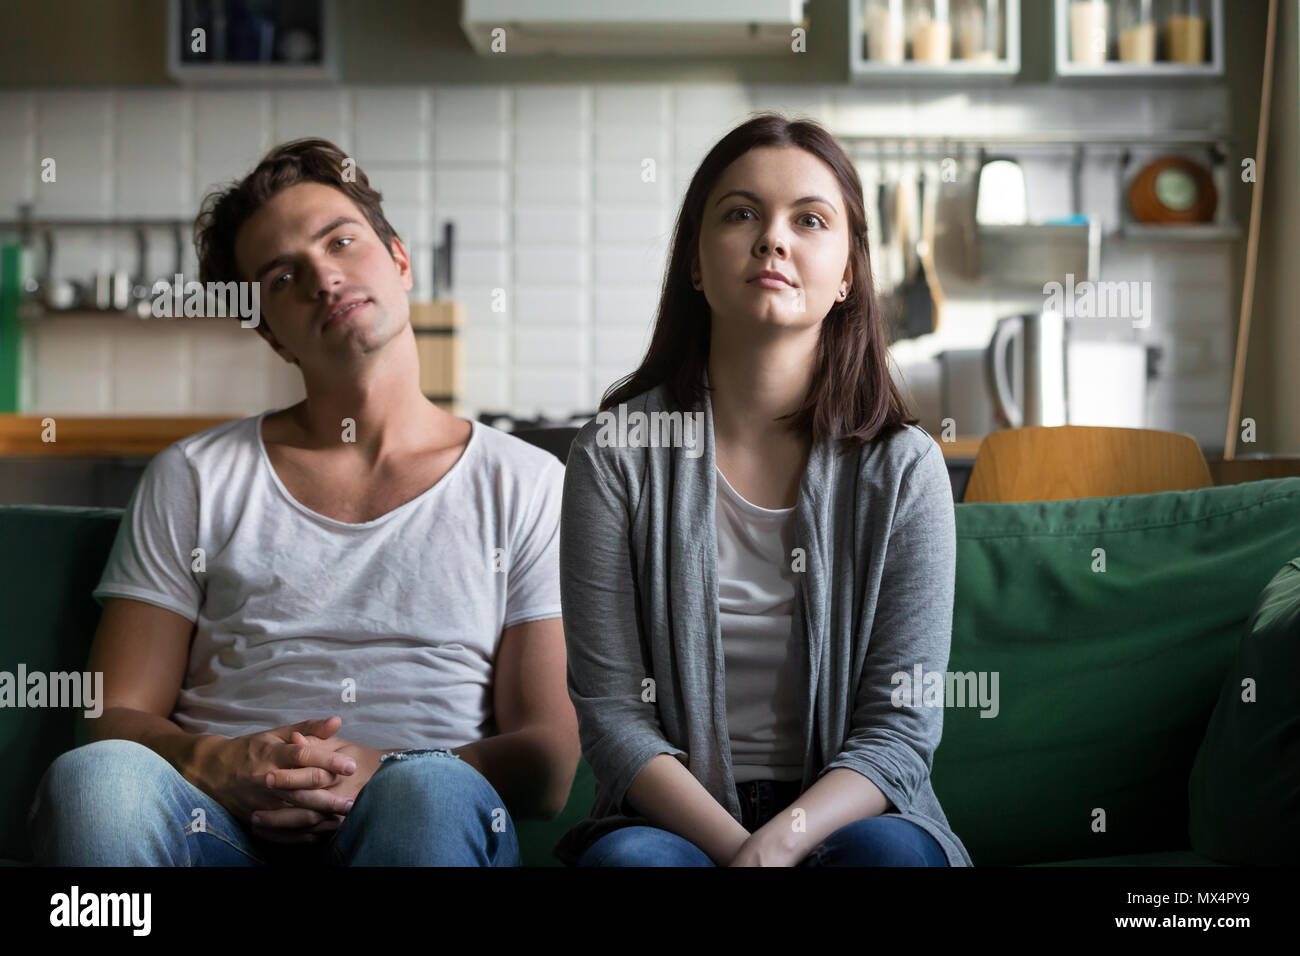 Lazy millennial couple getting bored at home sitting on sofa Stock Photo